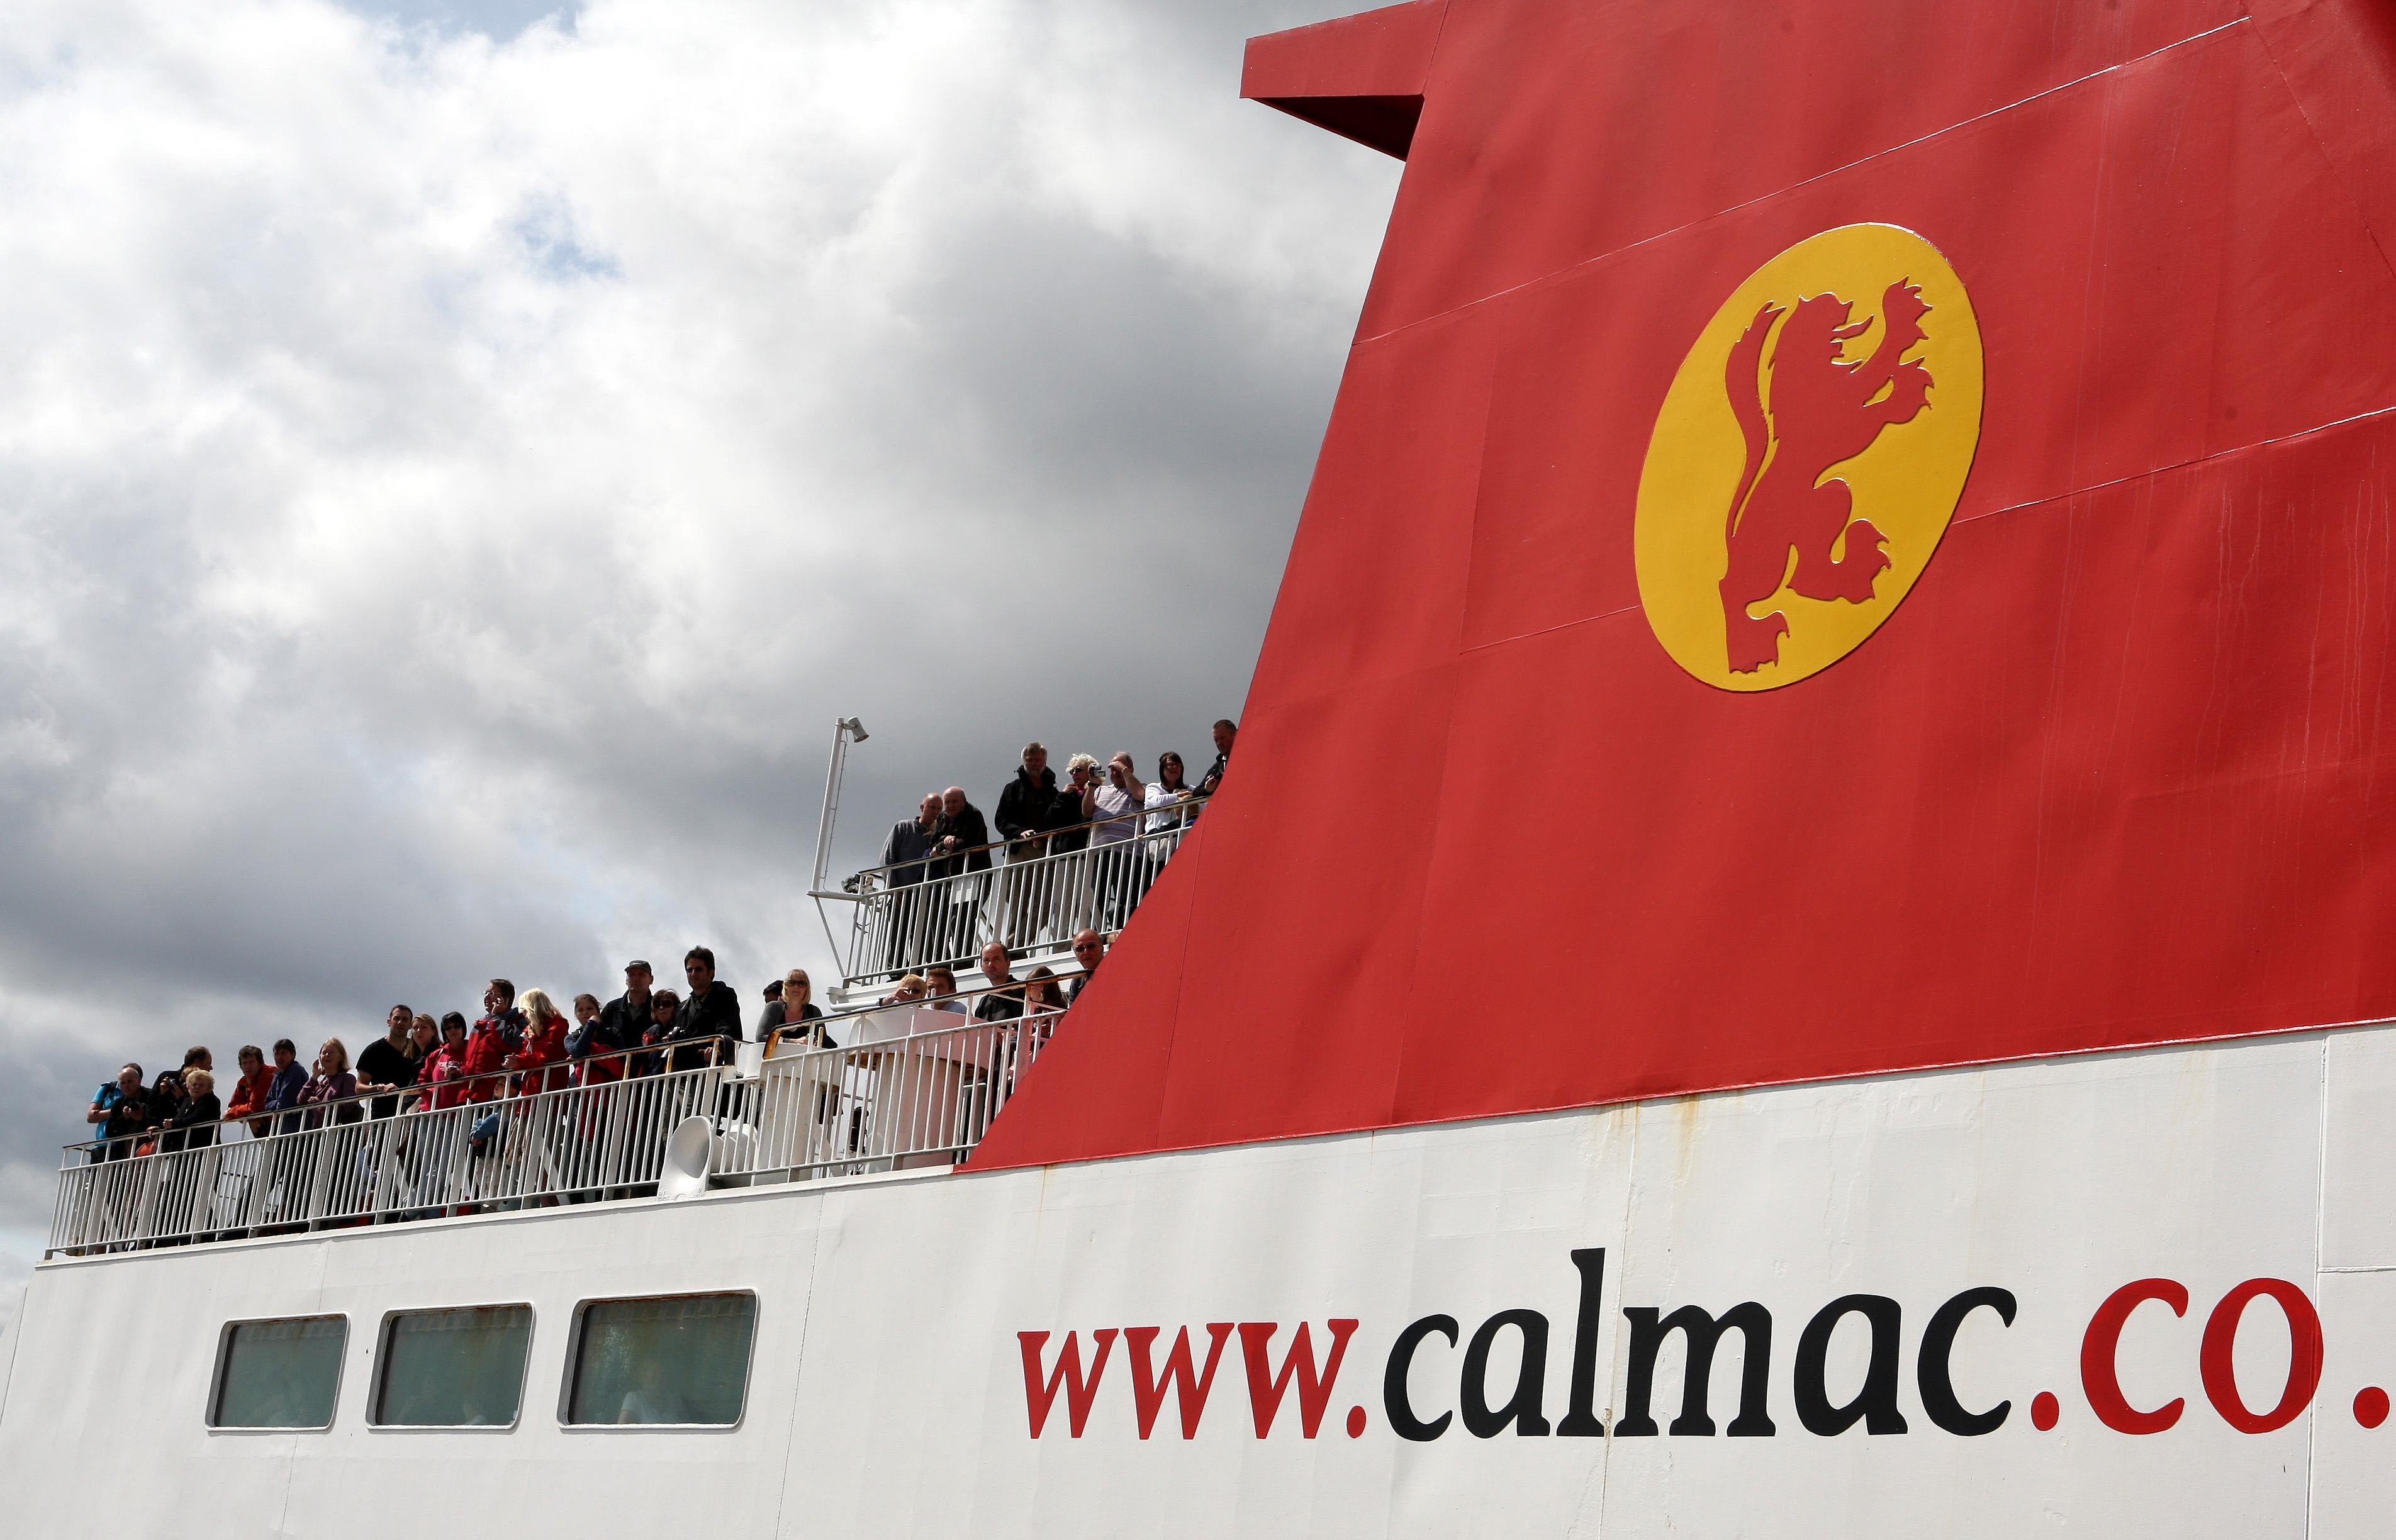 Western Isles Council has criticised CalMac (Andrew Milligan/PA)